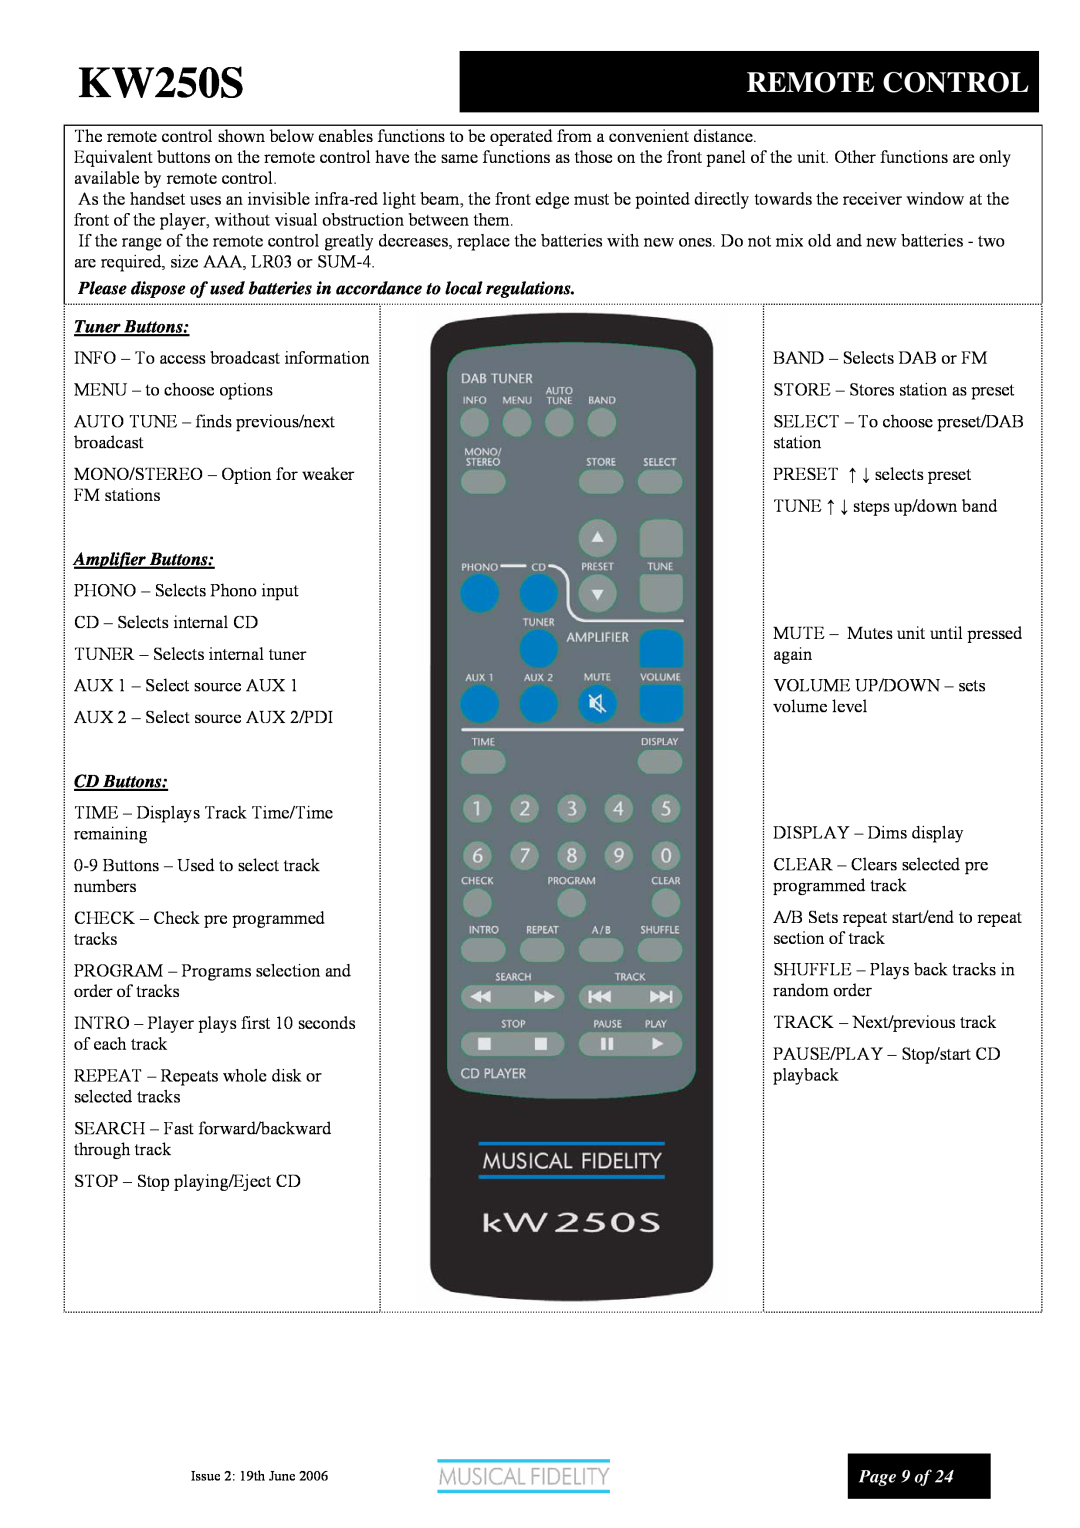 Musical Fidelity KW250S manual Remote Control, Tuner Buttons, Amplifier Buttons, CD Buttons, Page 9 of 